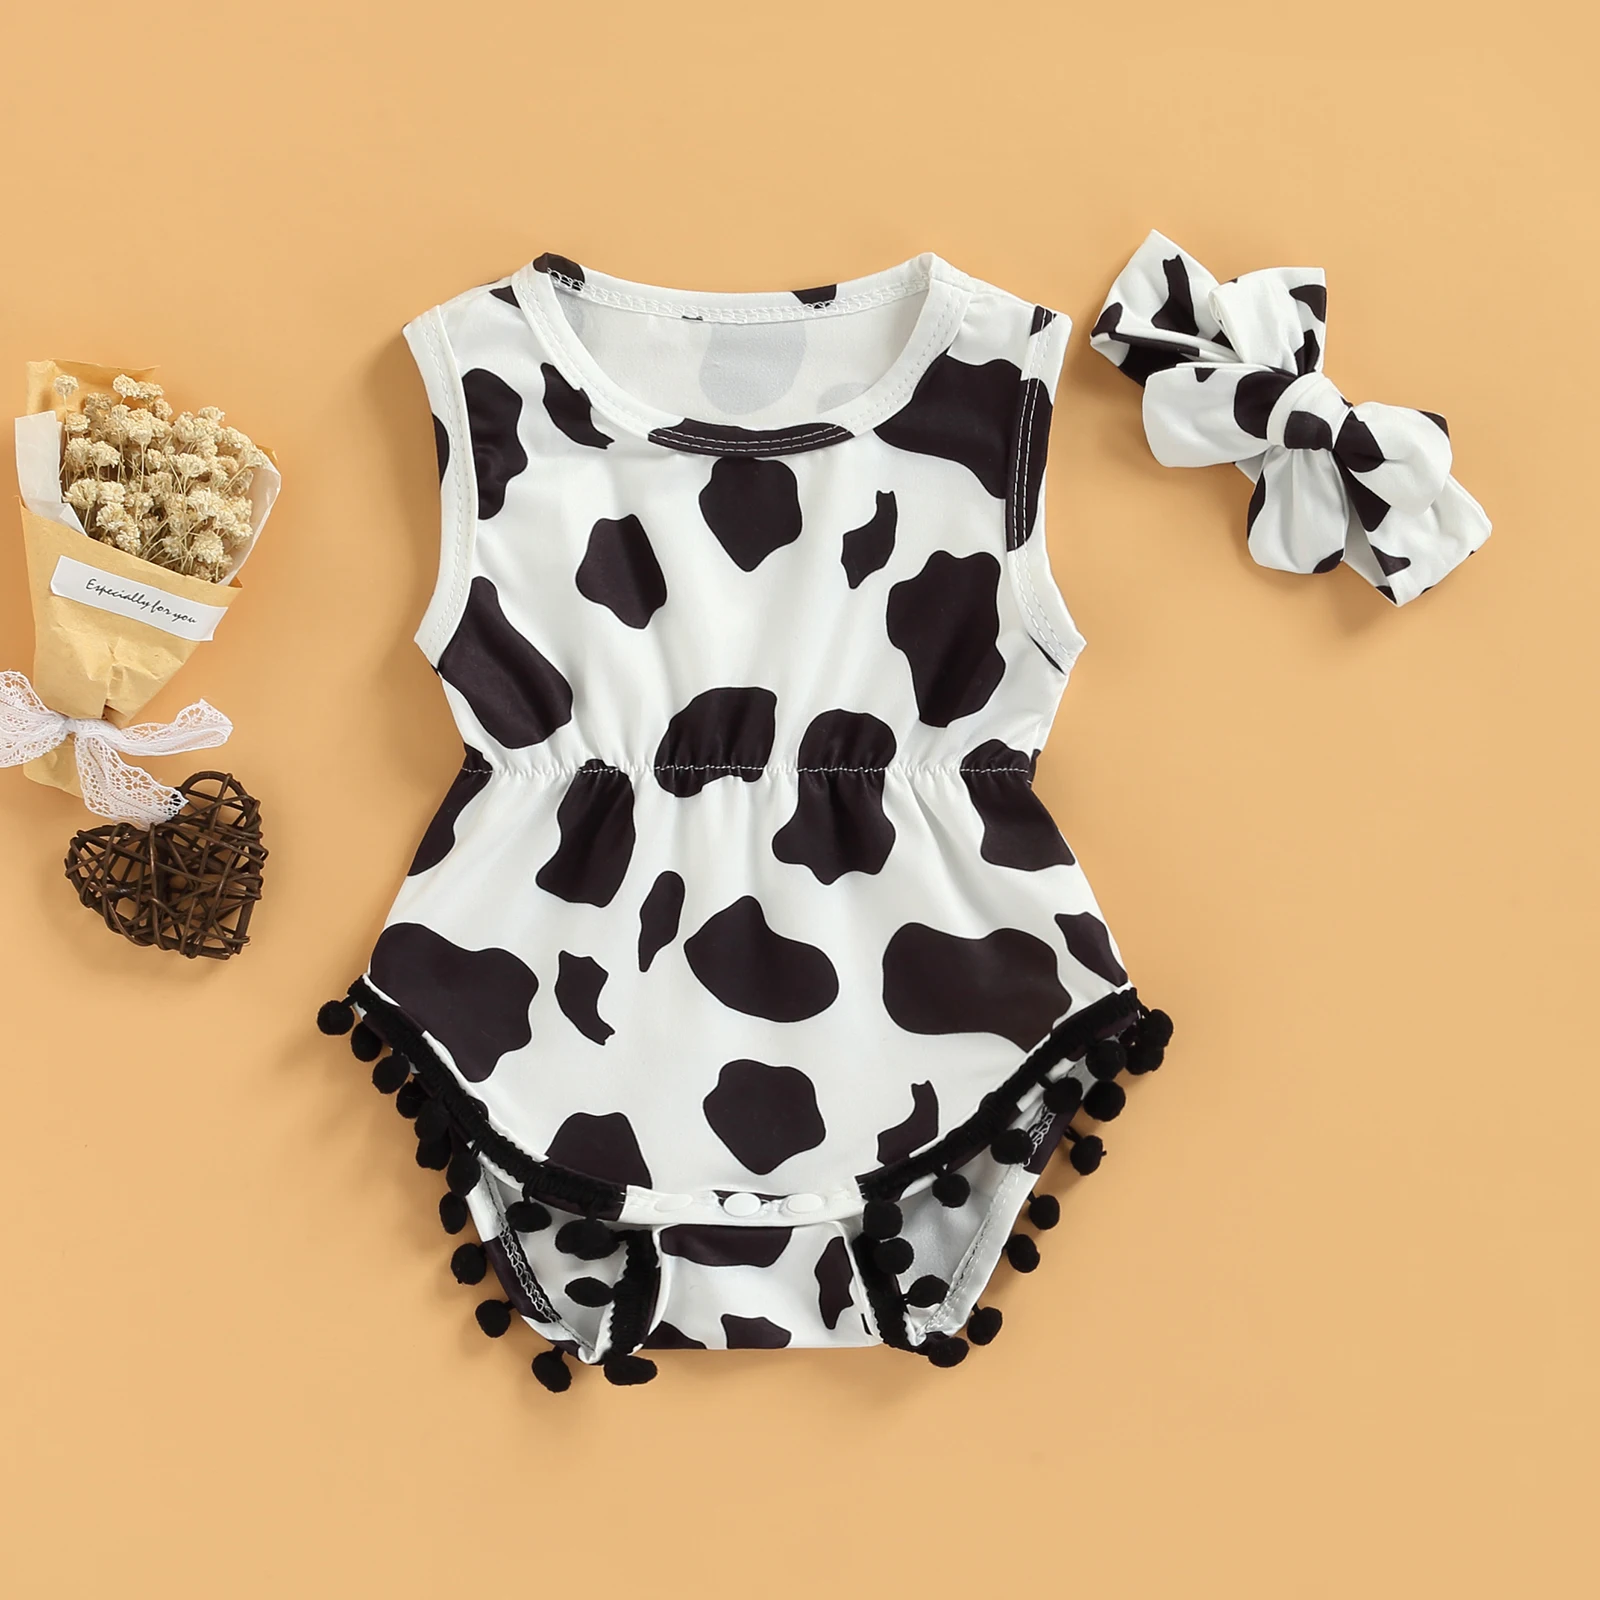 Baby Clothing Set cheap 2Pcs Summer Newborn Baby Cow Print Outfits Toddler Girls Boy Sleeveless Round Neck Tassel Bodysuit+Bow Headband Clothes Suit baby clothes in sets	